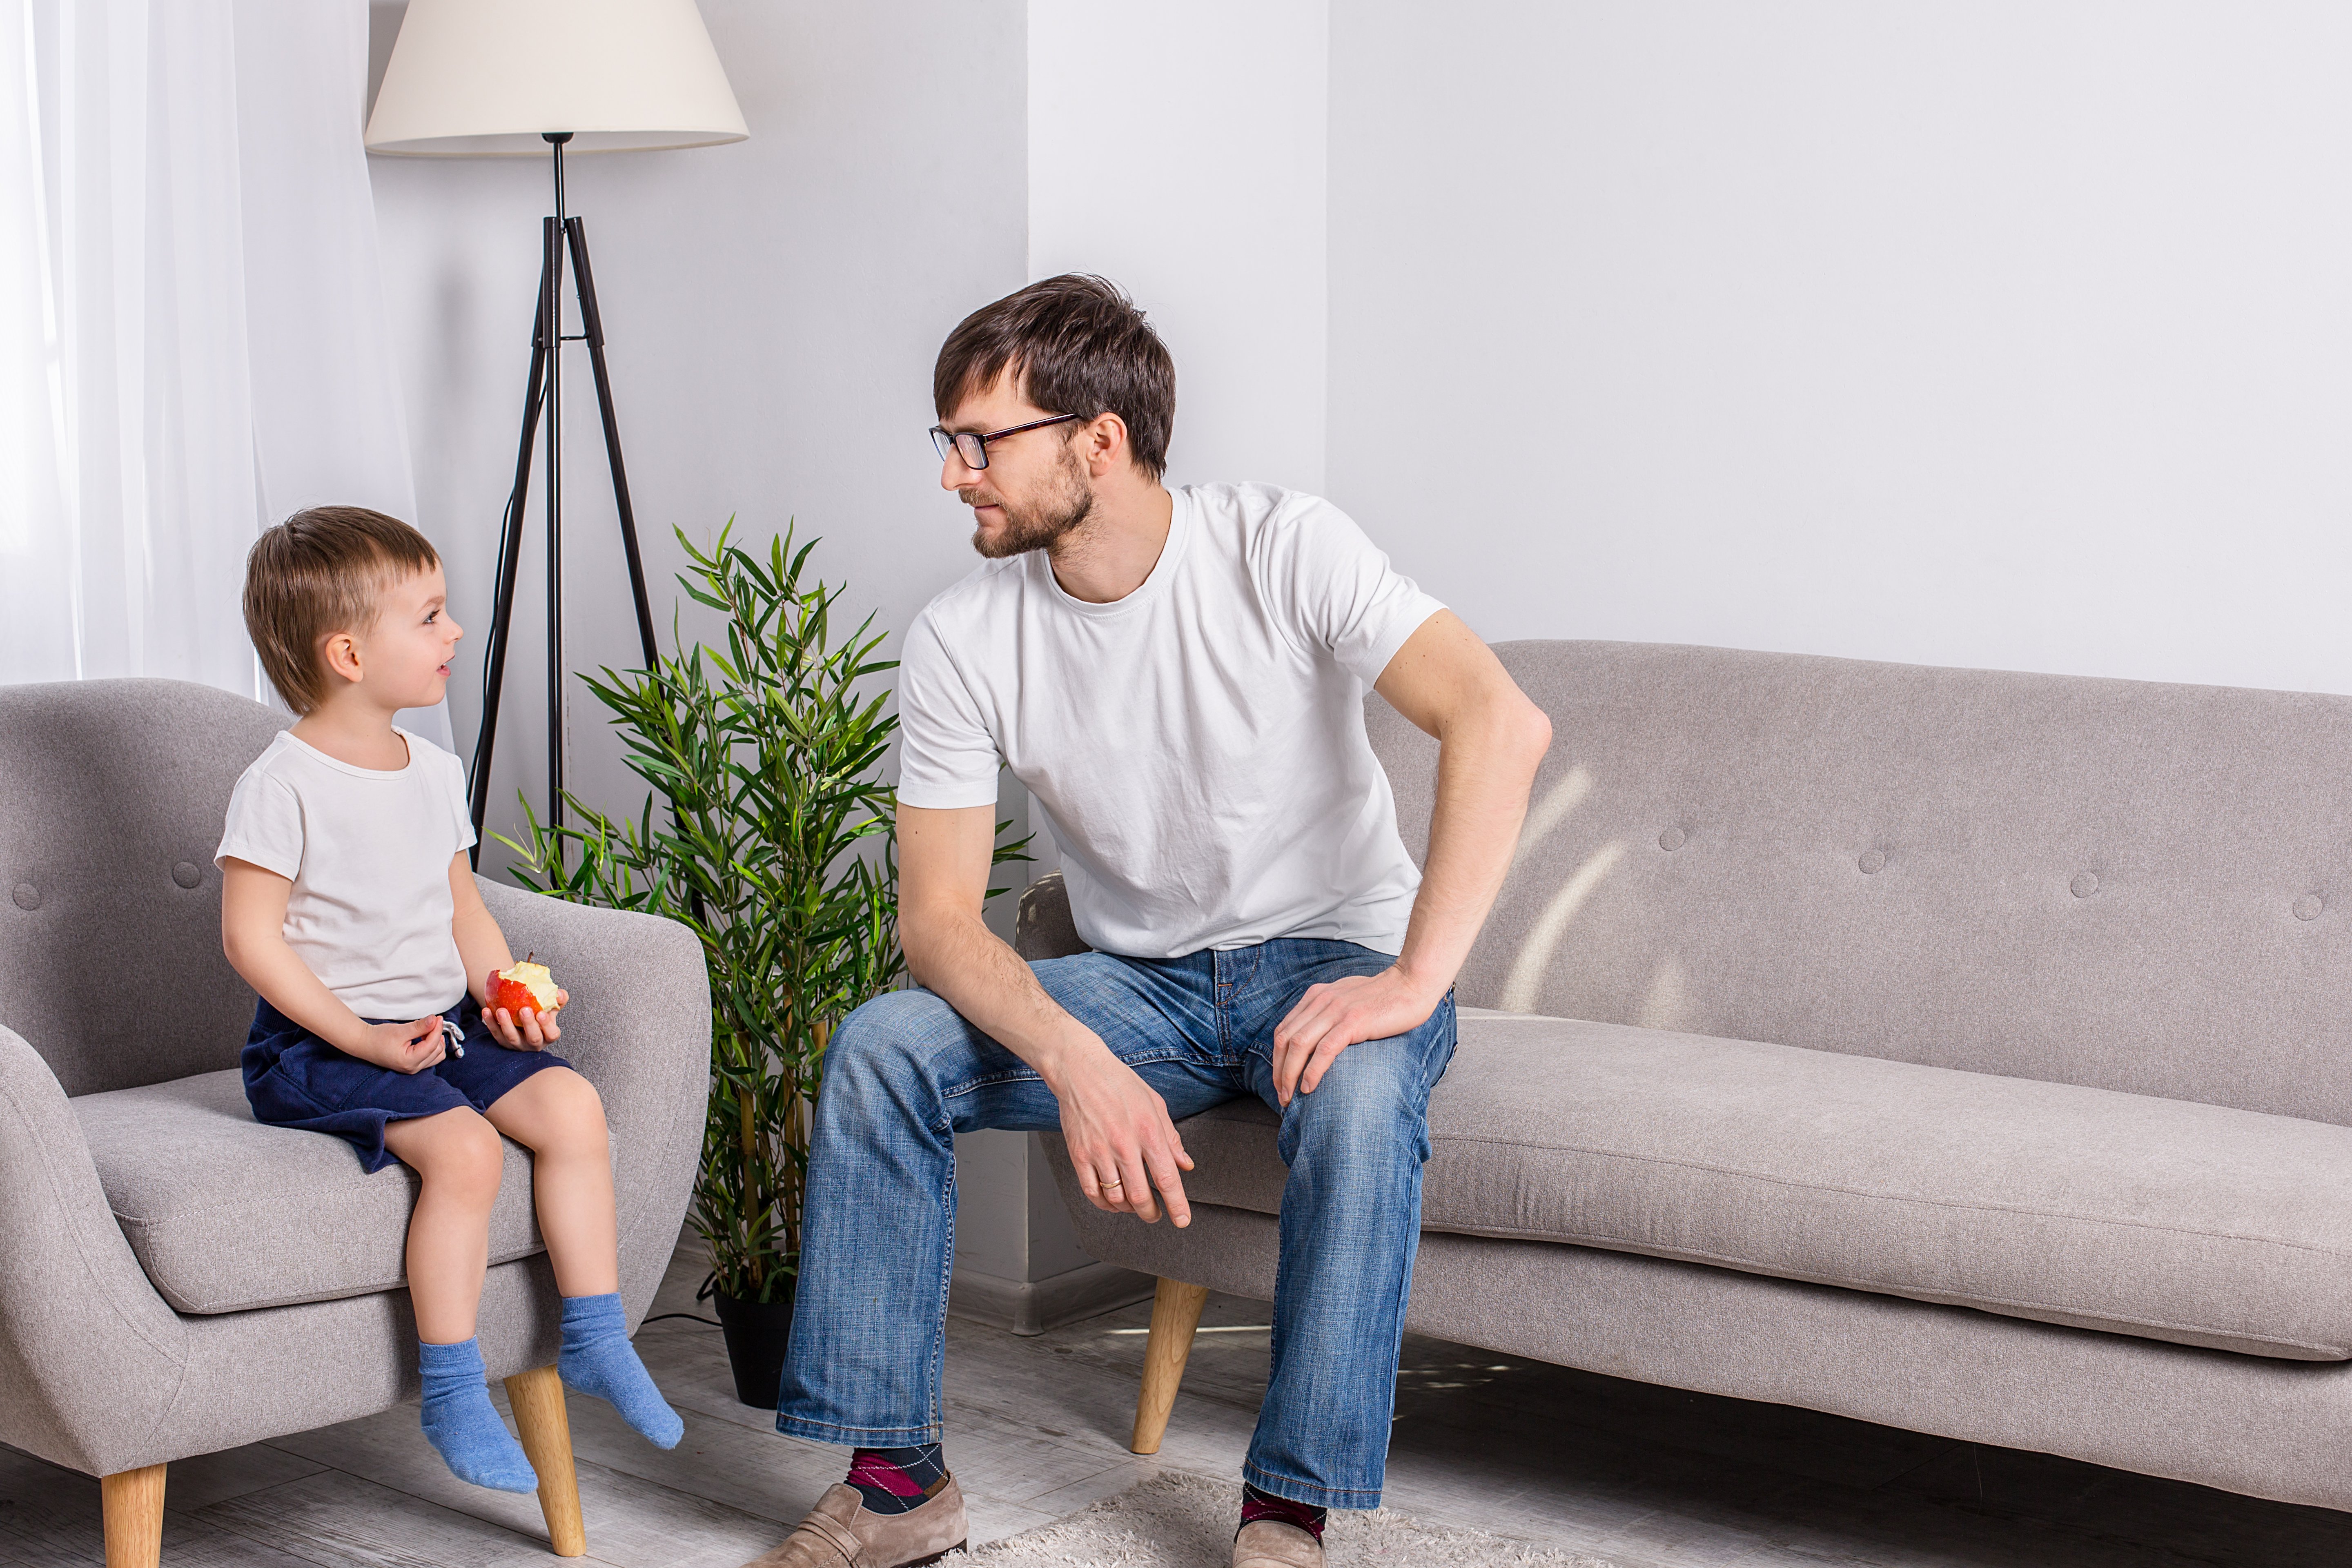 father-young-son-discussing-something-serious-living-room-home-family-trust